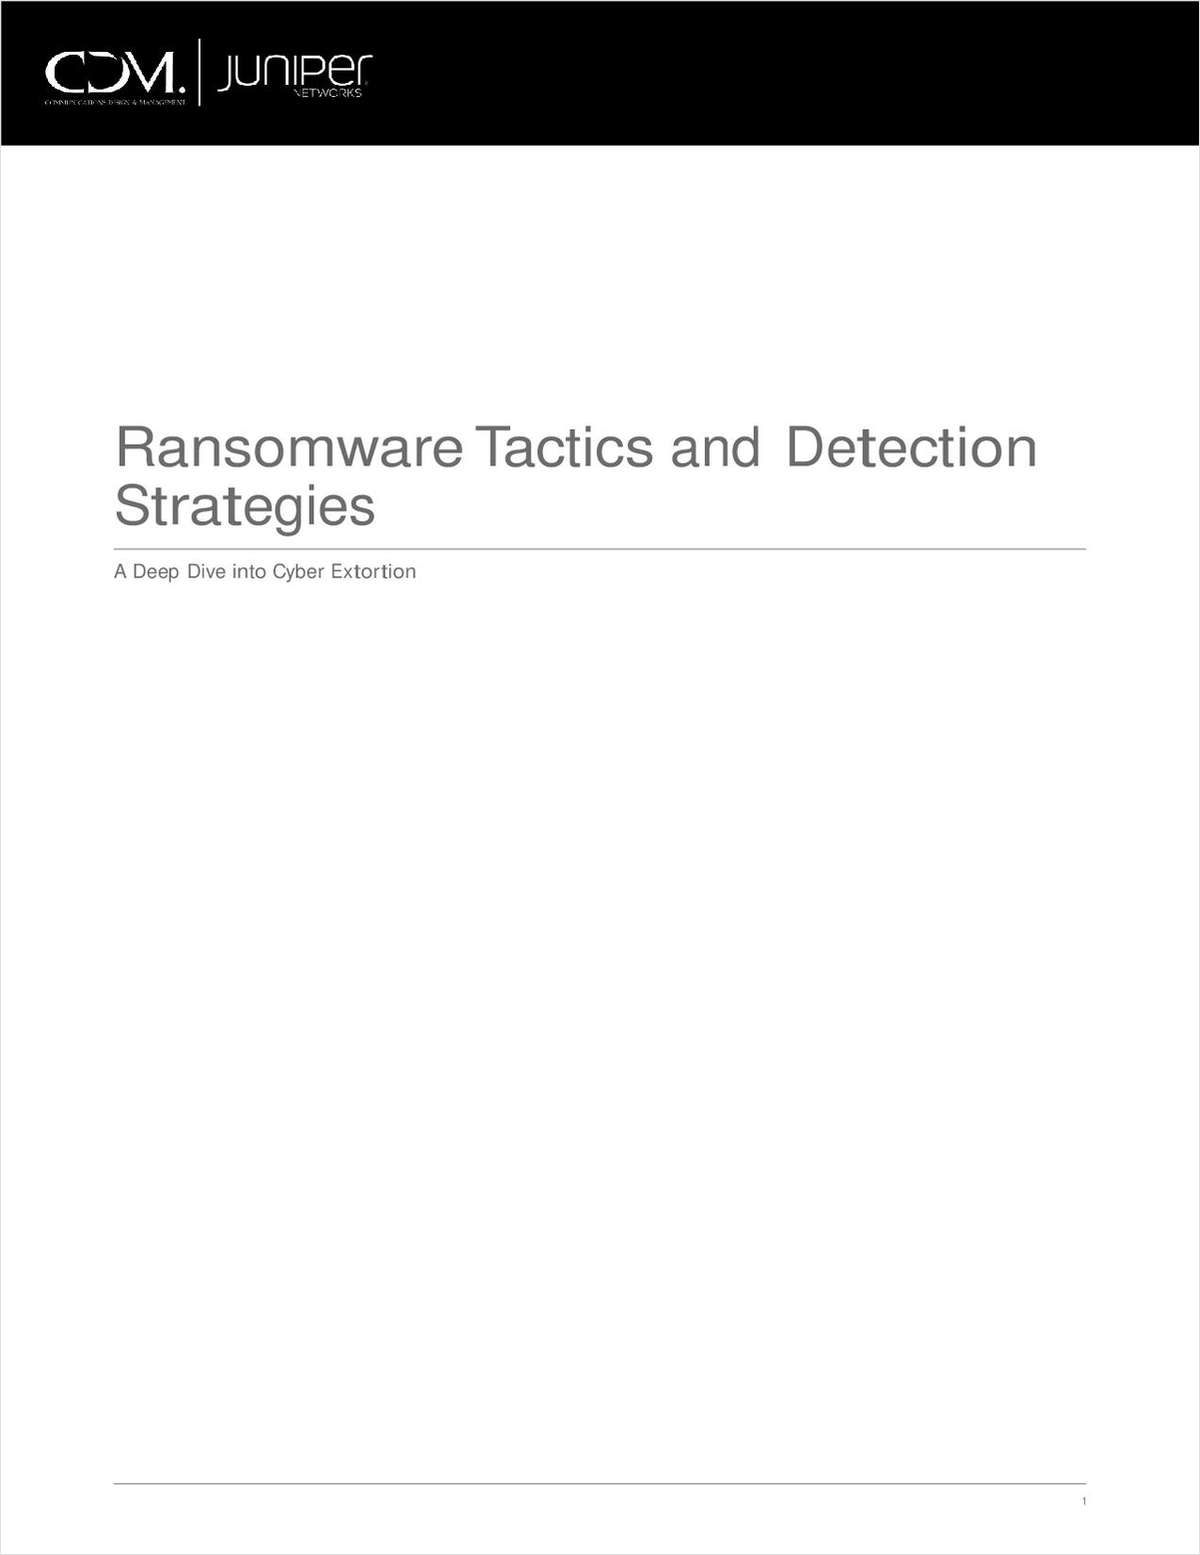 Ransomware Tactics and Detection Strategies